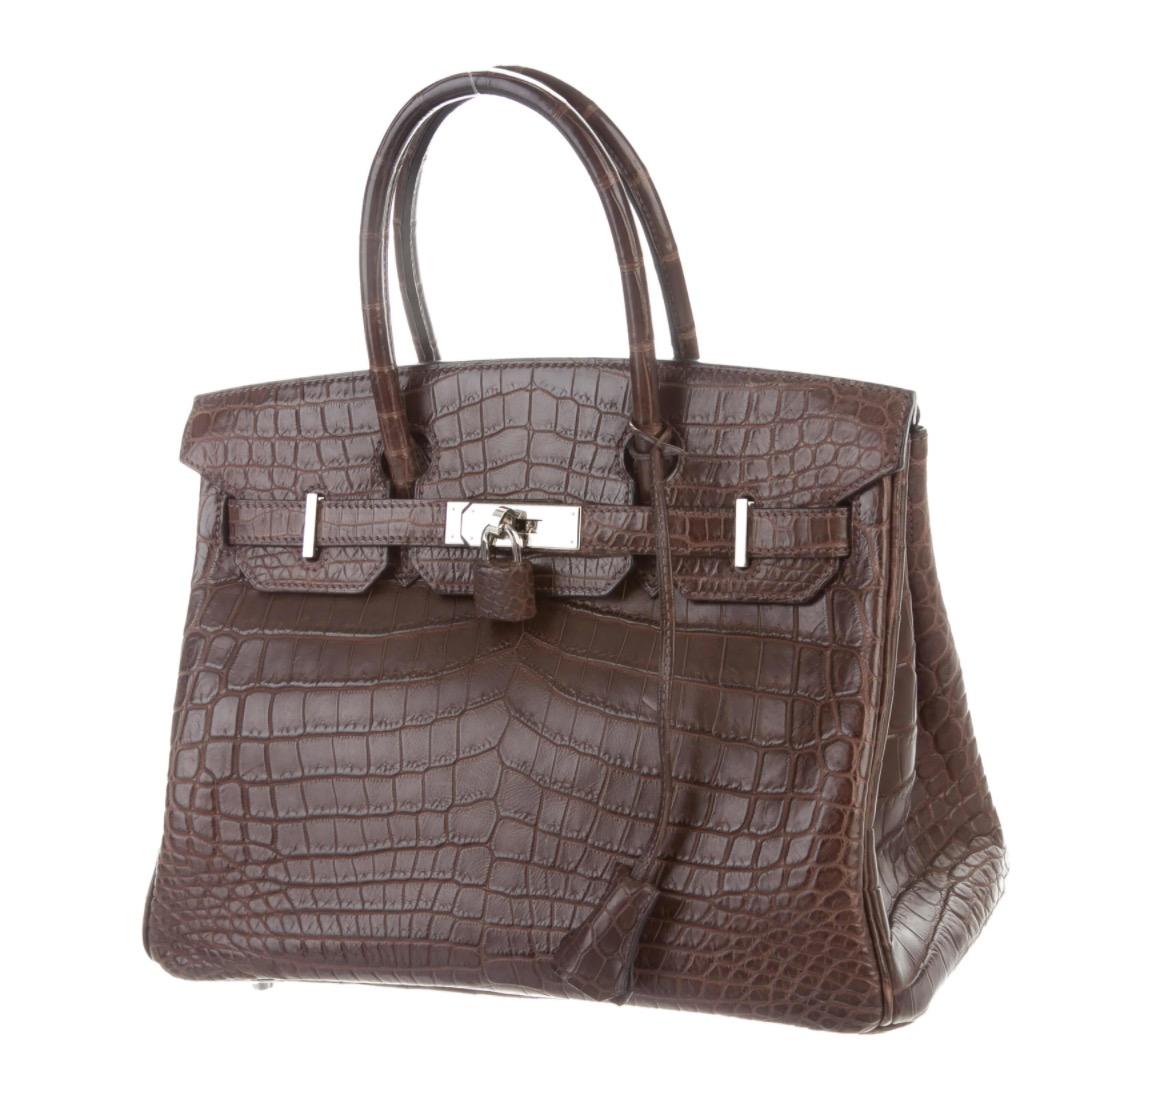 Our Newest Hermes Birkin Has Arrived.   

Featuring matte exotic crocodile skin leather, this Hermes Birkin 30 is one of the most coveted Birkin from the French fashion house. Featuring stunning palladium hardware, it’s a strikingly beautiful status